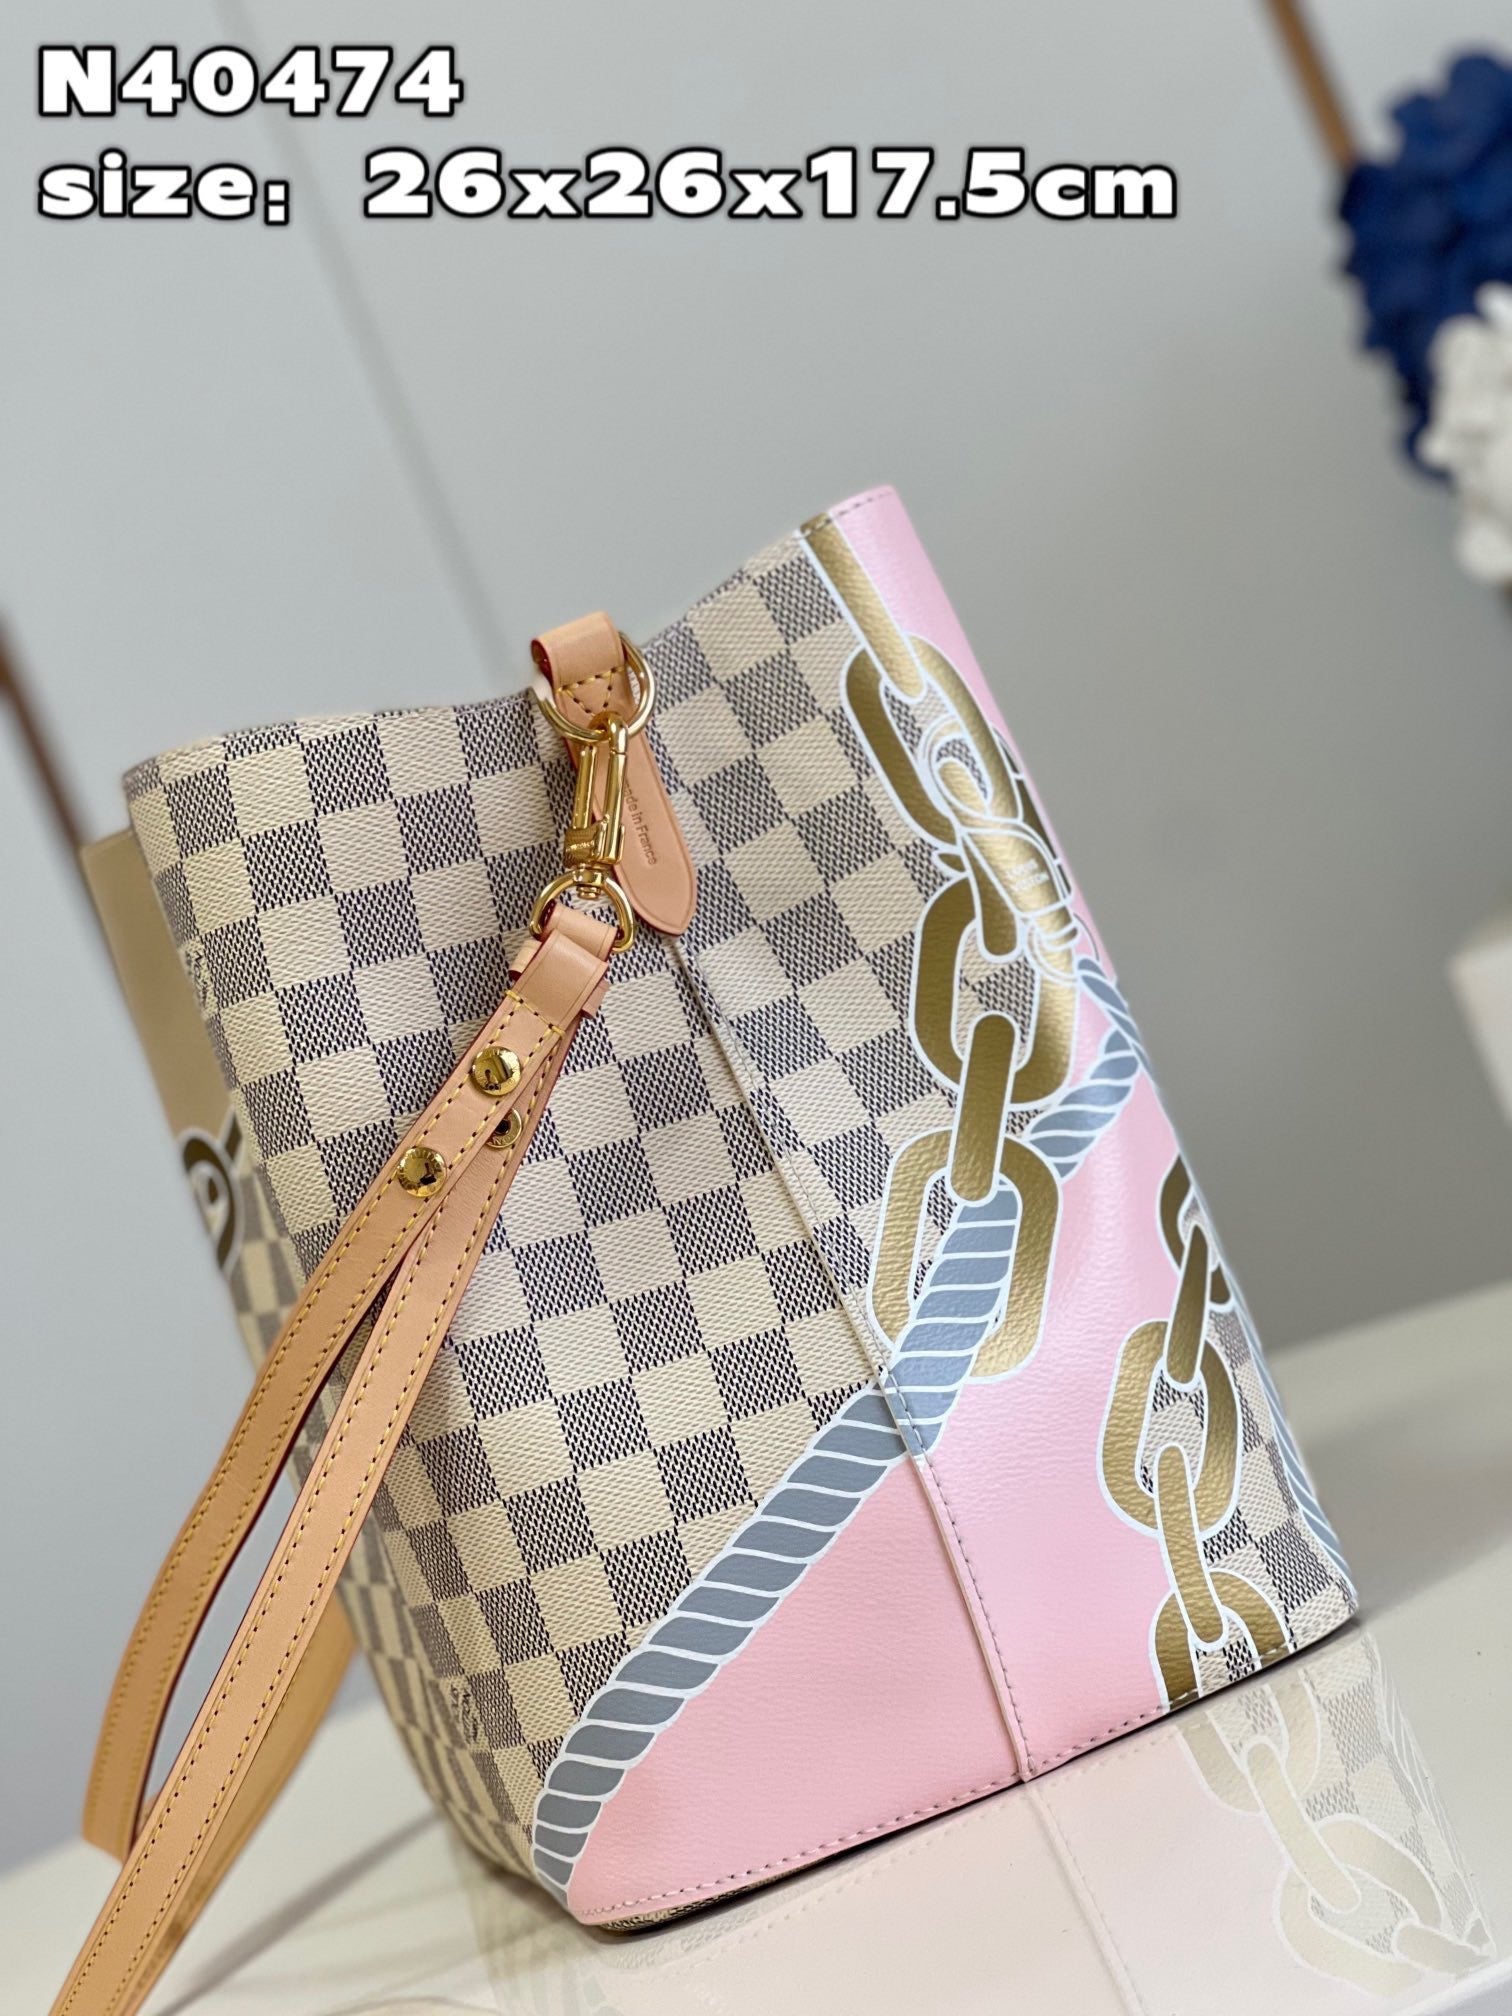 UPDATE: more pictures of LV Nautical summer Damier Azur Collection 2023